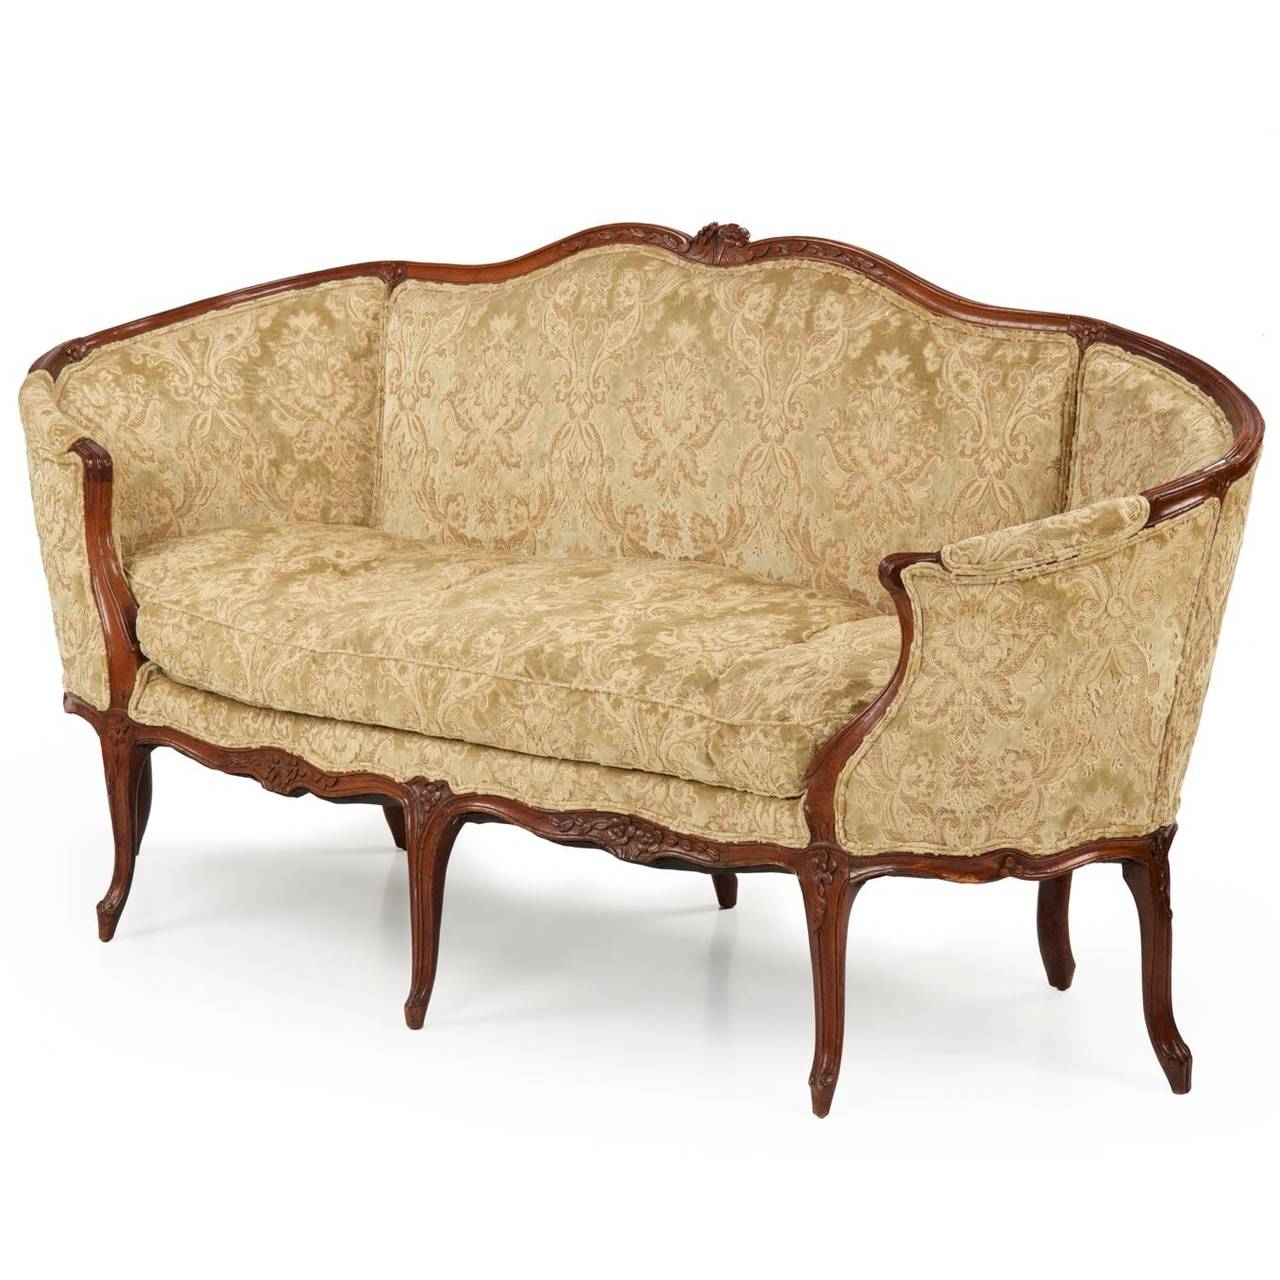 An exceedingly fine work clearly executed by a talented hand, this Louis XV period canapé is designed with excellent proportions and overall form.  The arms wrapping around the seat on either side, the settee has a warm presence intended for